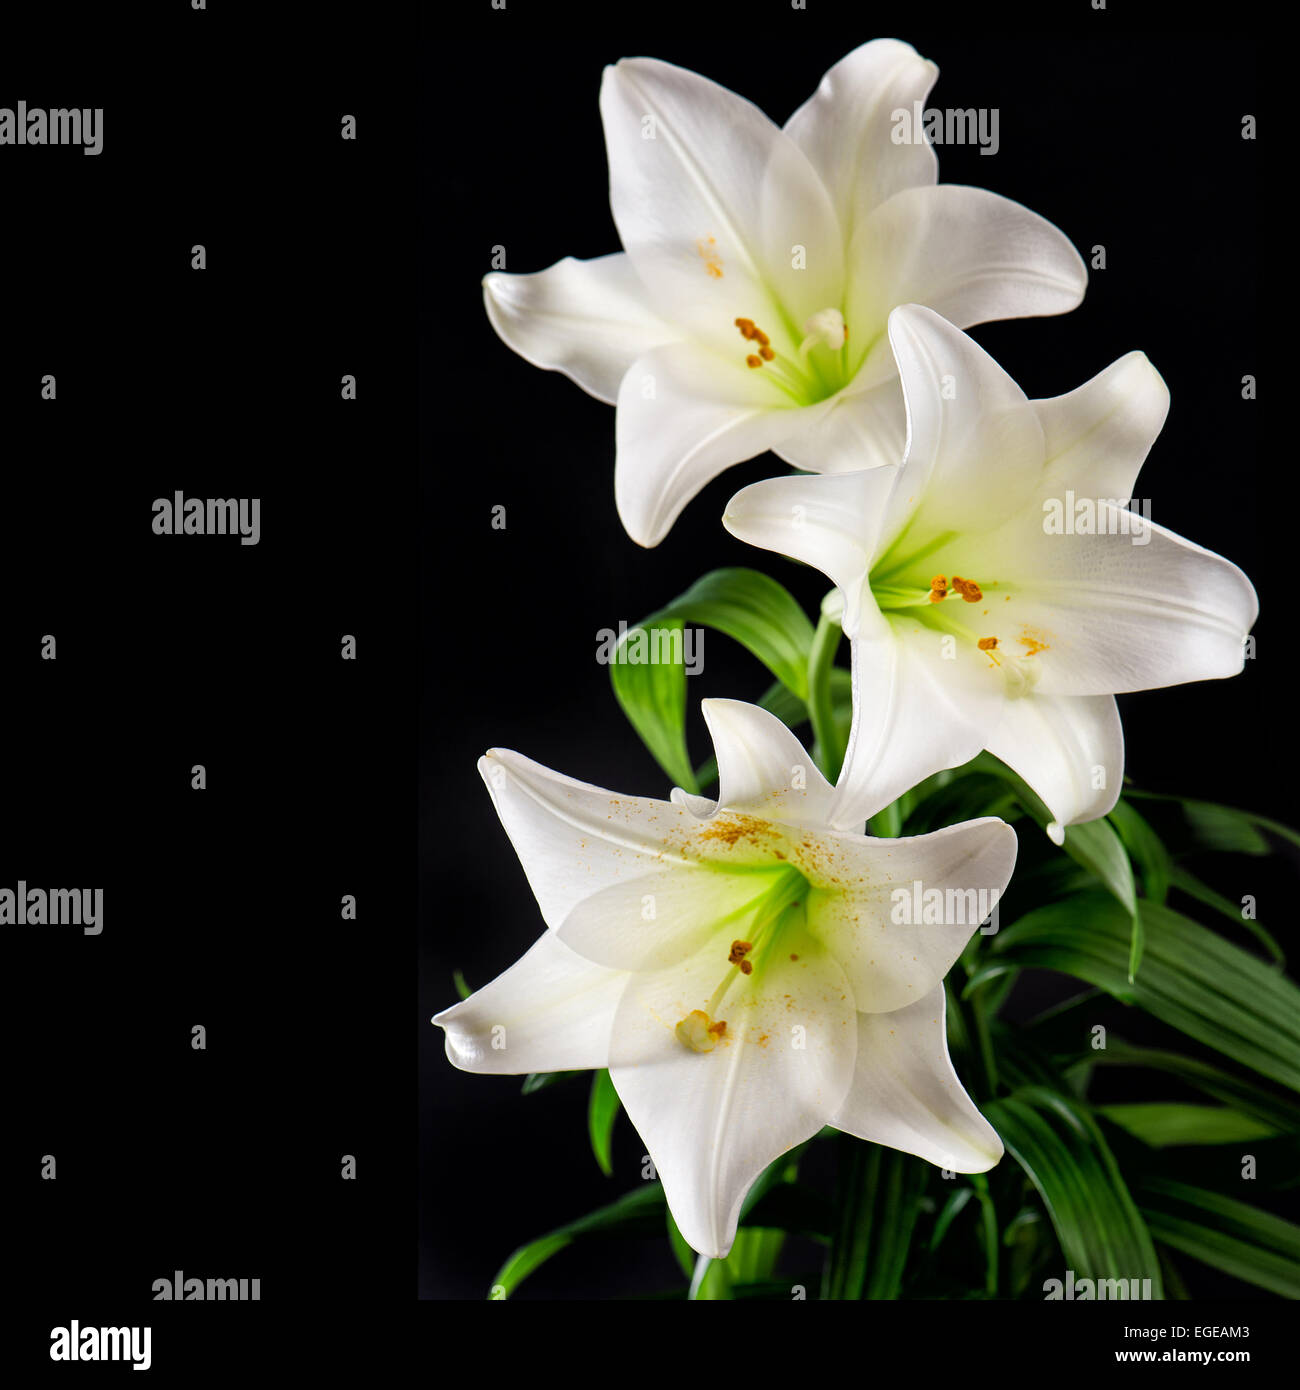 White lily flowers bouquet on black background. Condolence card concept Stock Photo